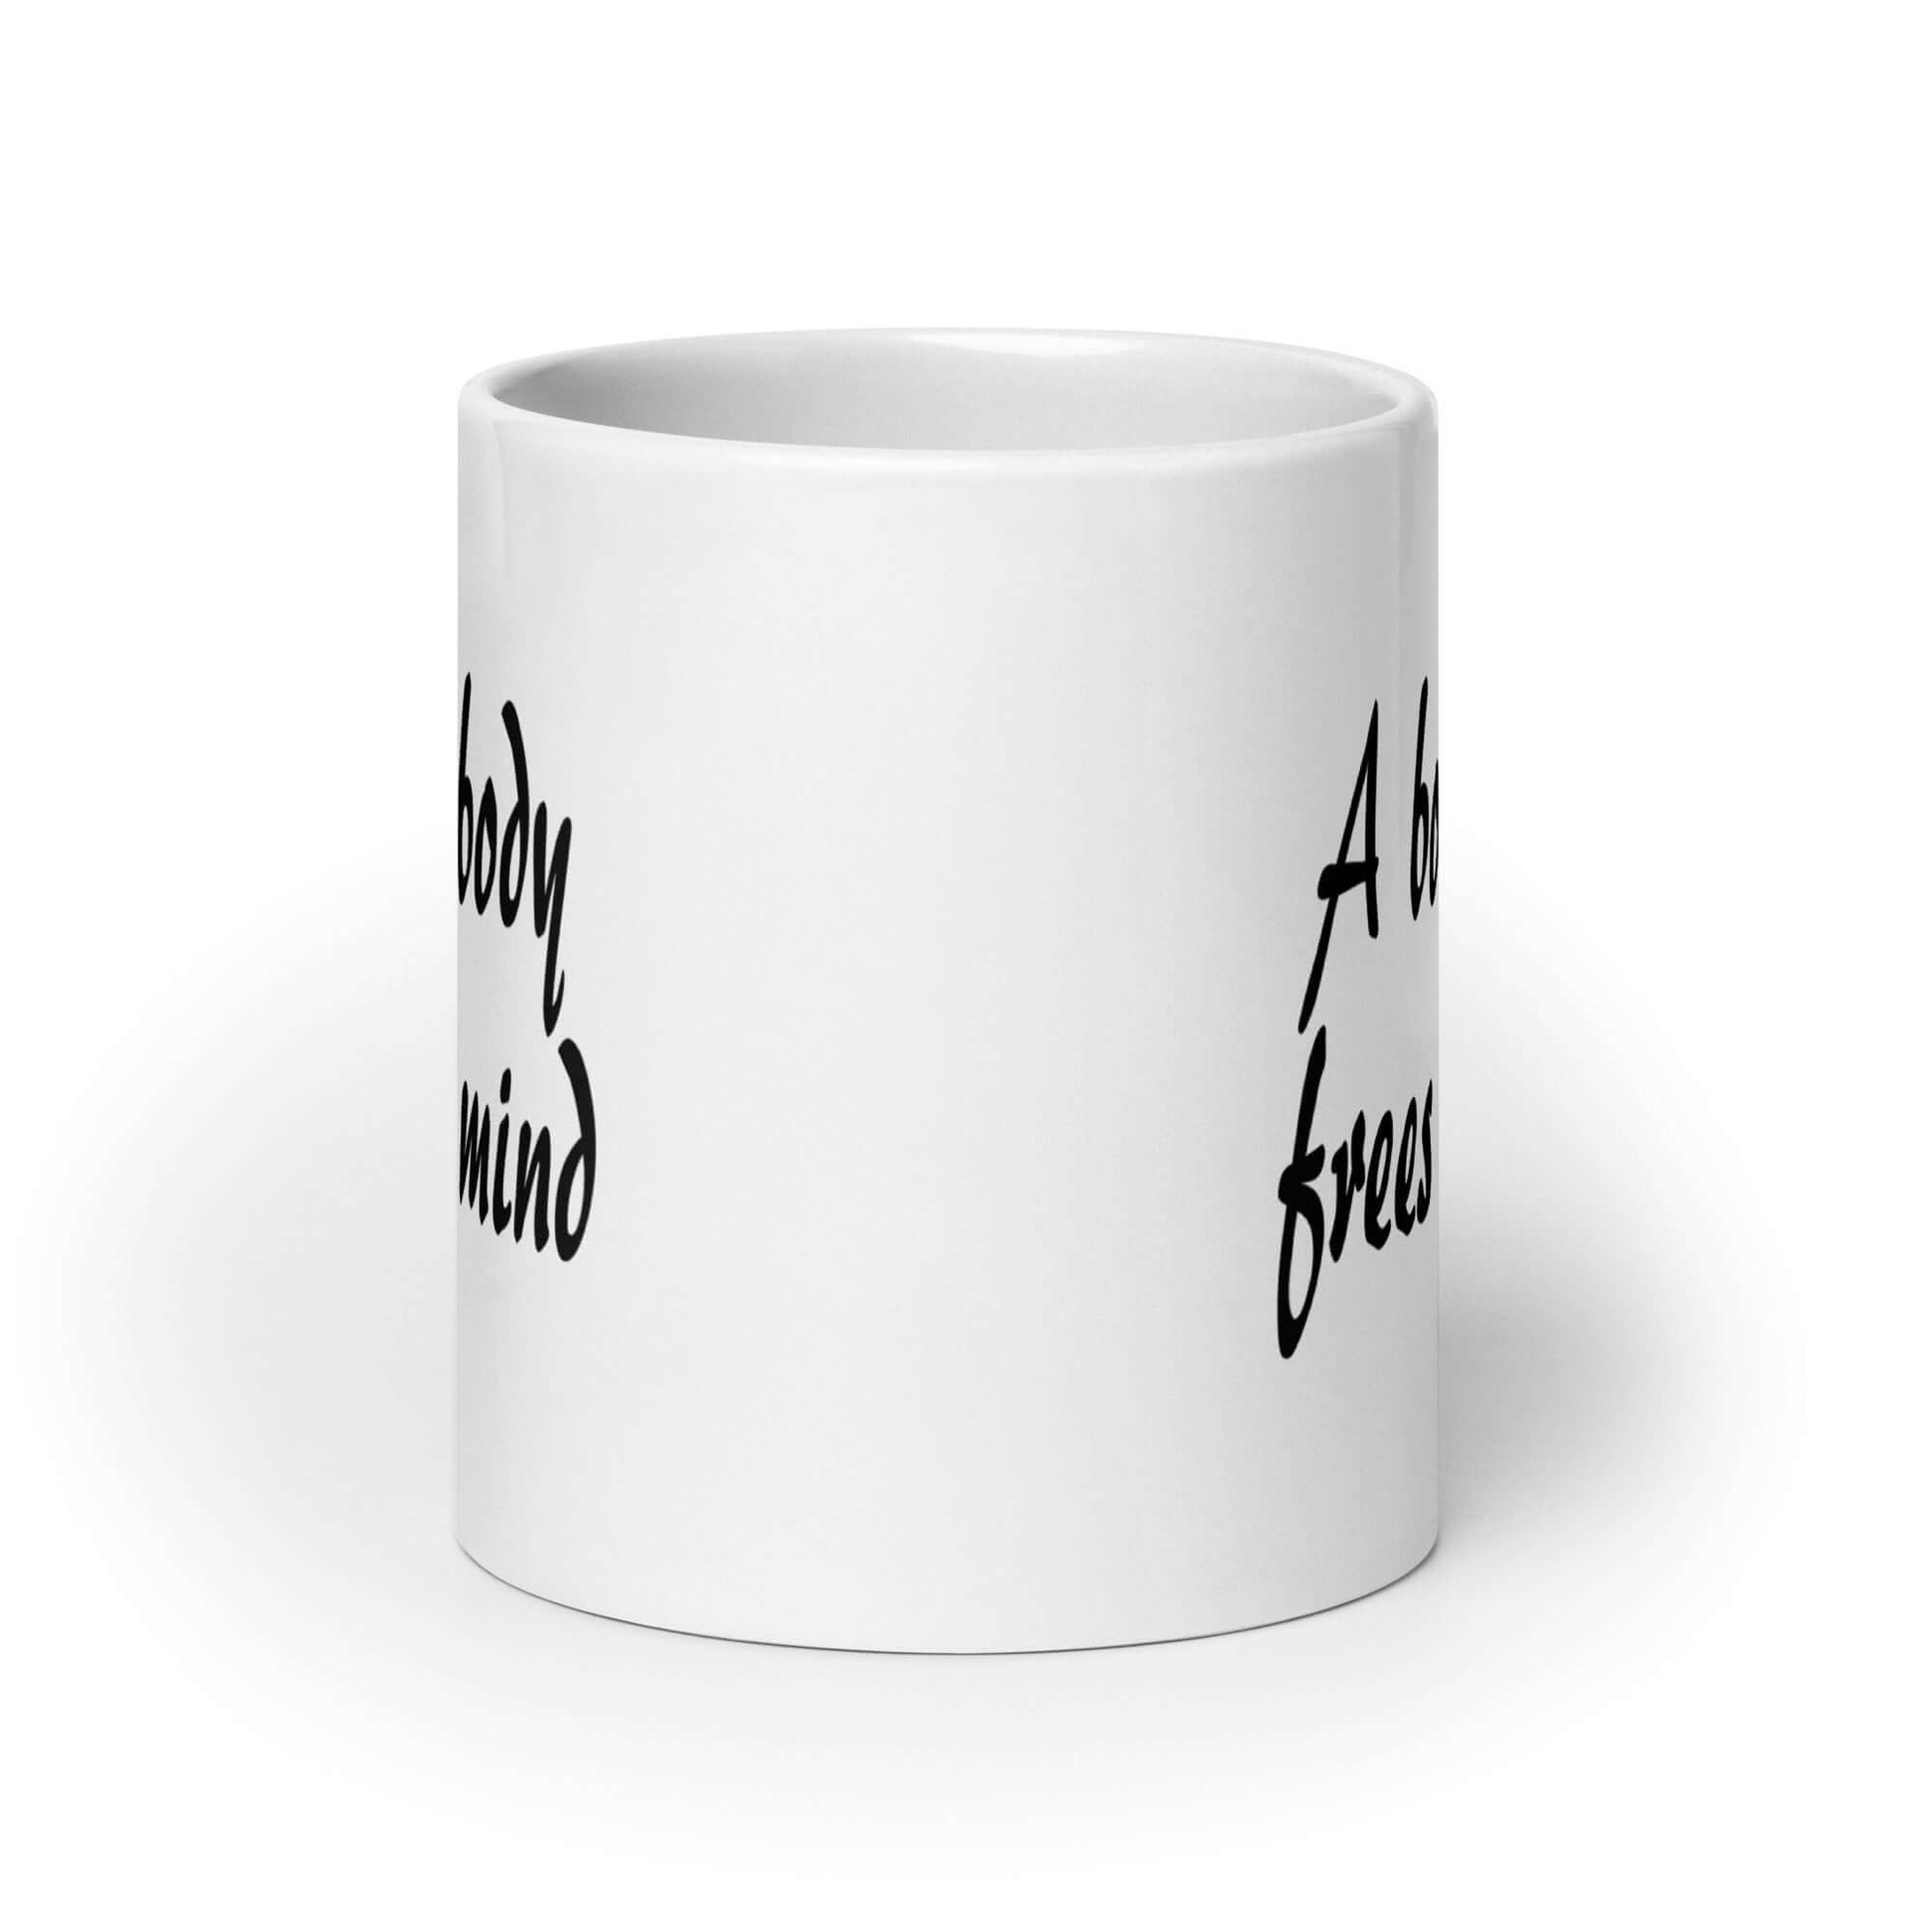 White ceramic coffee mug with the BDSM phrase A bound body frees the mind printed on both sides of the mug.